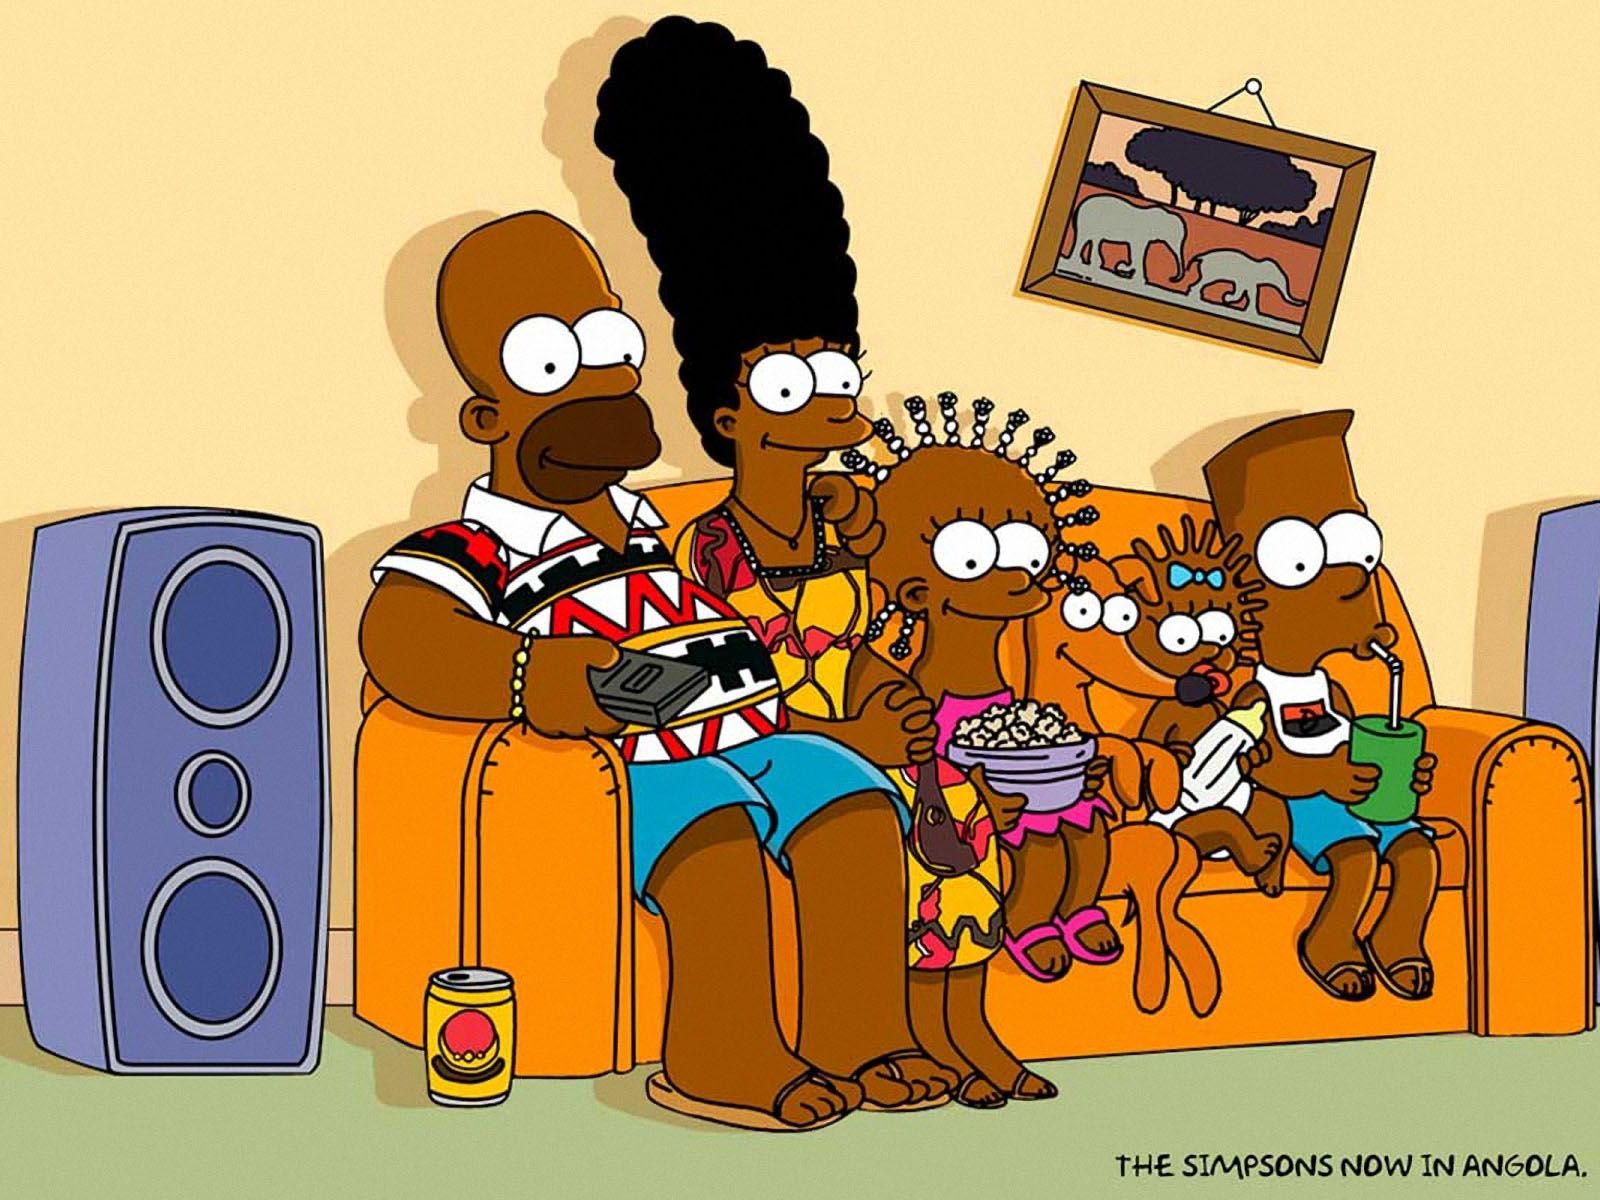 HD Wallpaper The Simpsons Simpsons Family. Black cartoon characters, The simpsons, Simpsons art